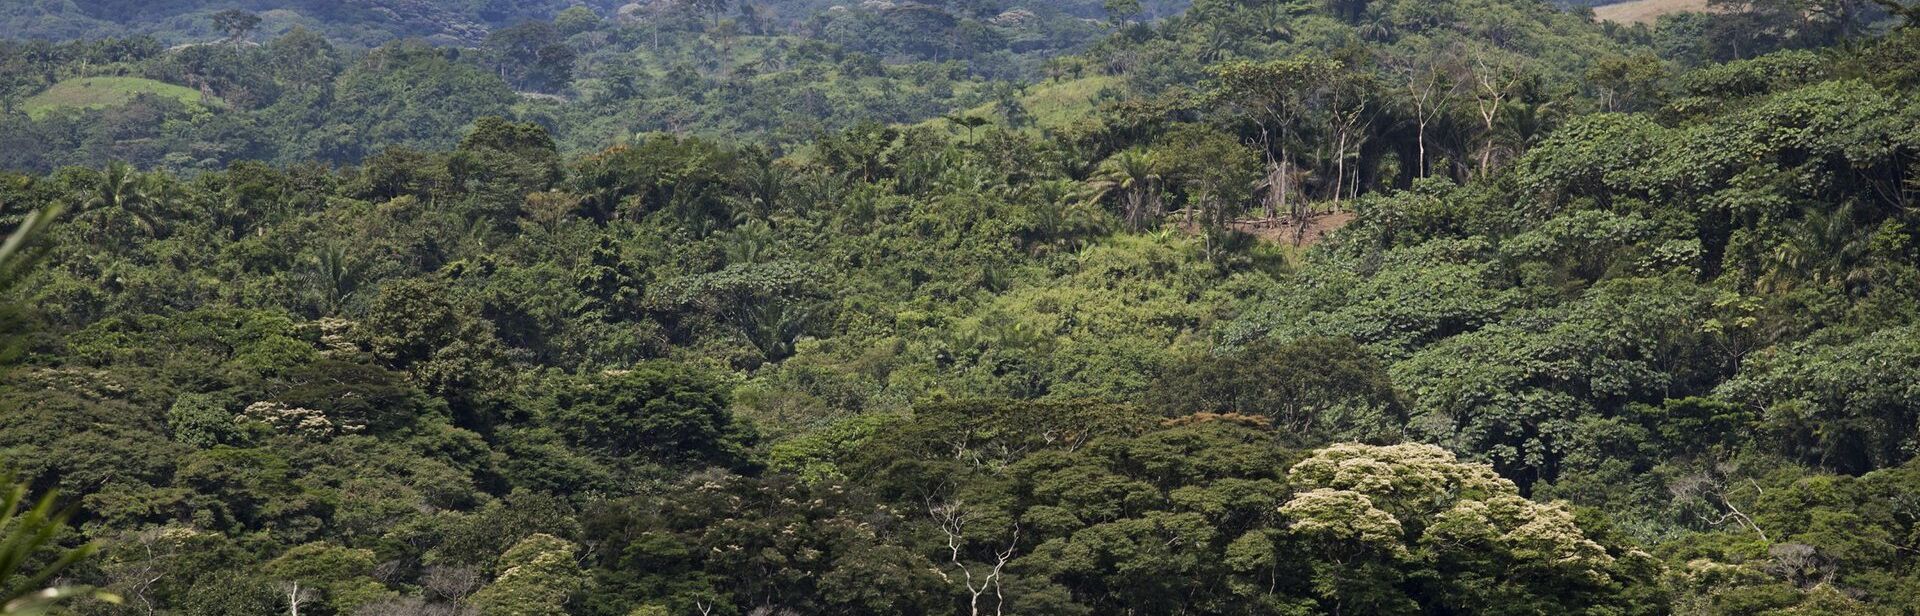 Forest in the Congo basin